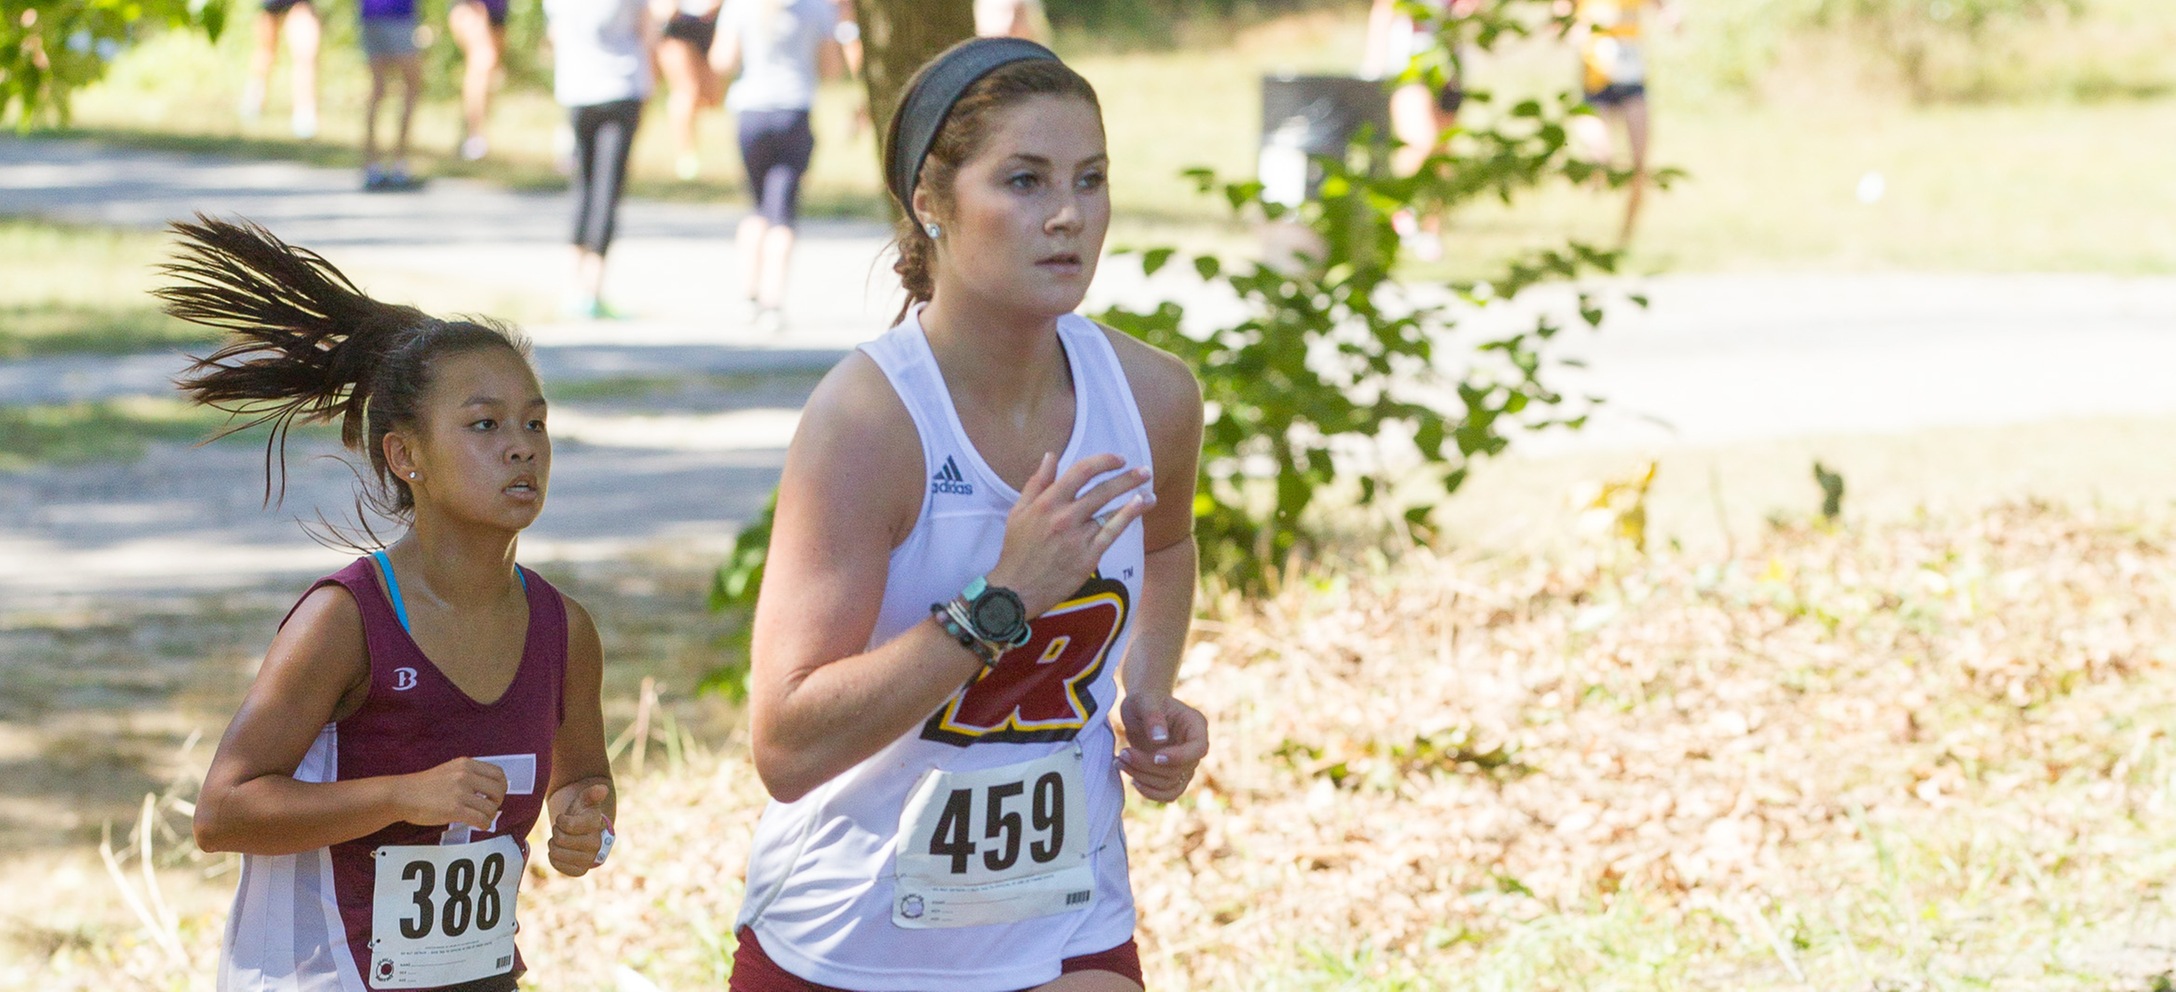 Women's XC Sweeps GNAC Weekly Awards as Curtin & Mann Take Top Honors